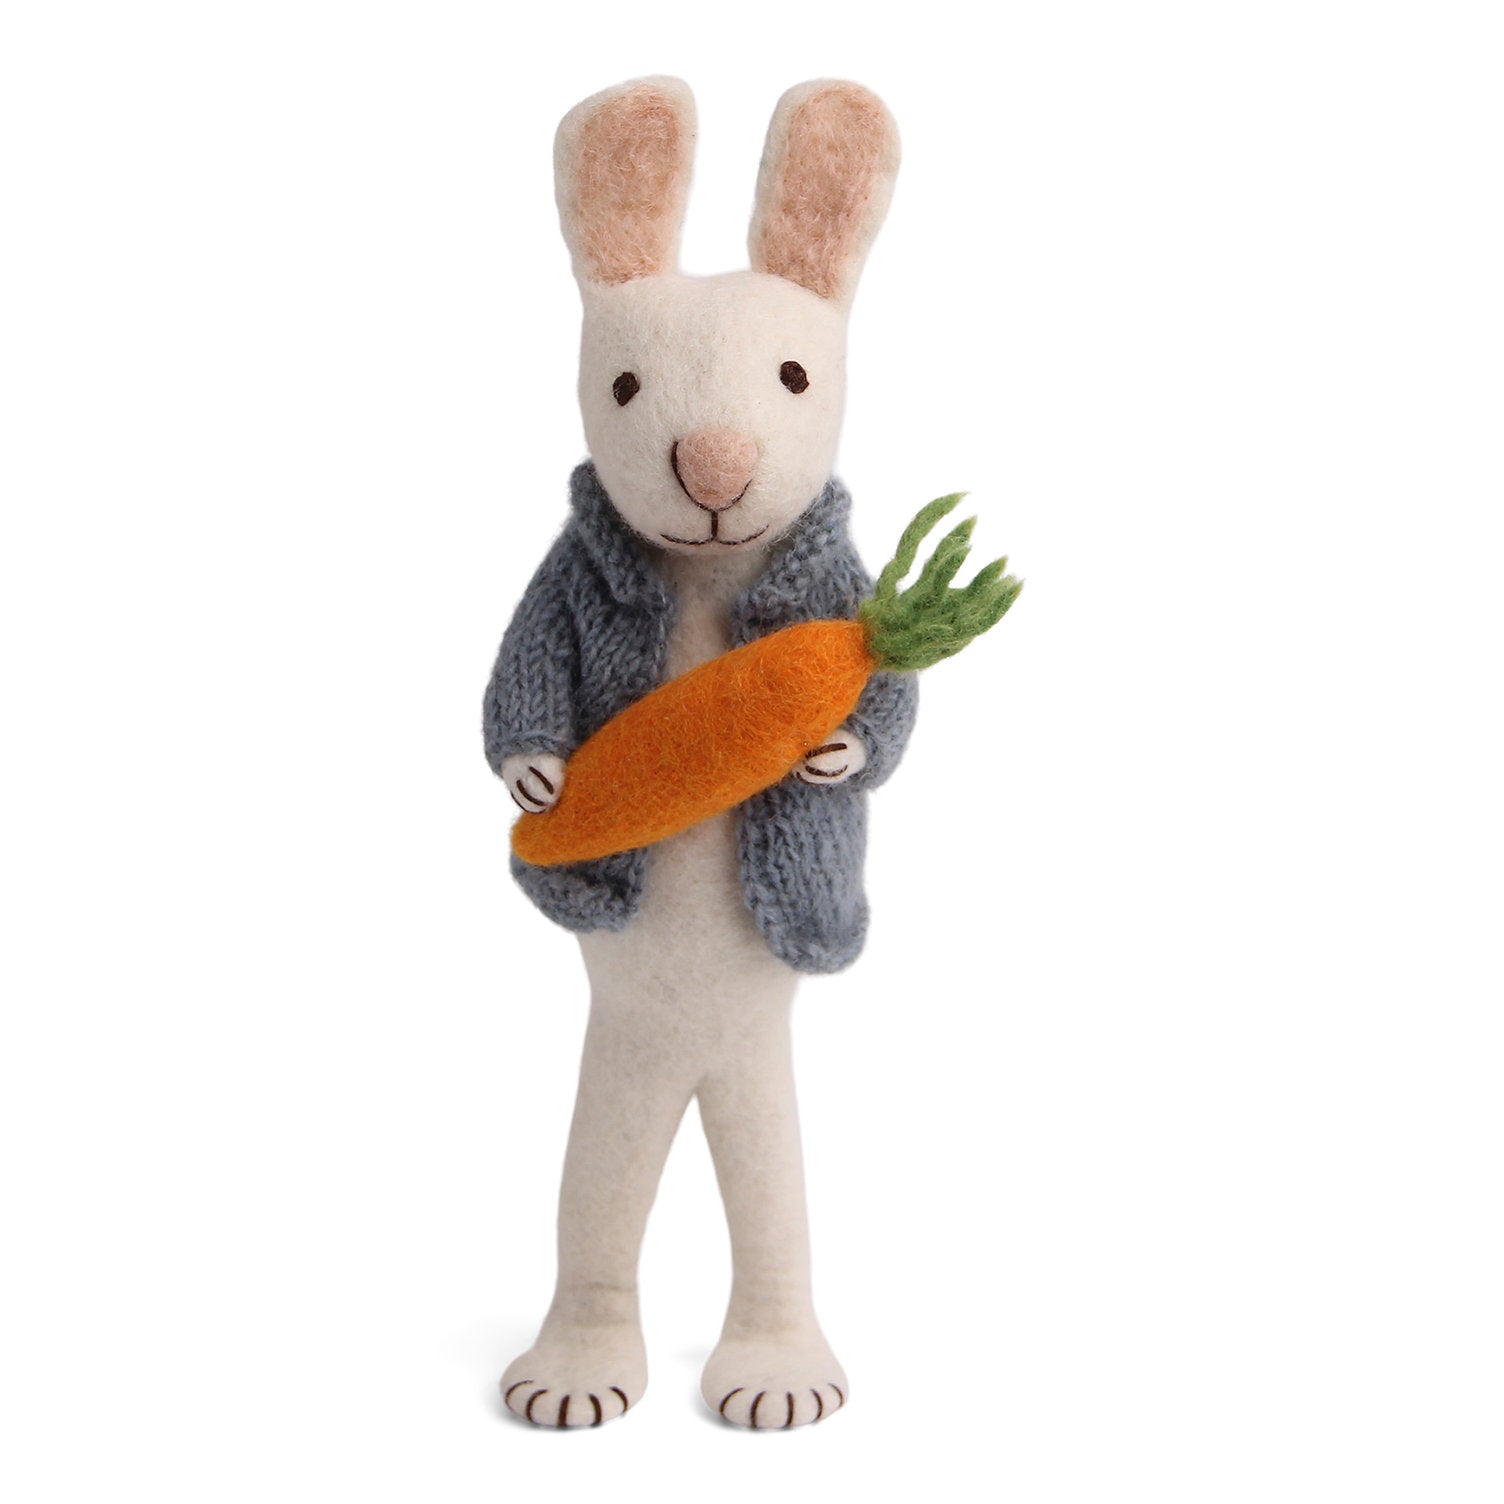 White Bunny with Blue Jacket and Carrot